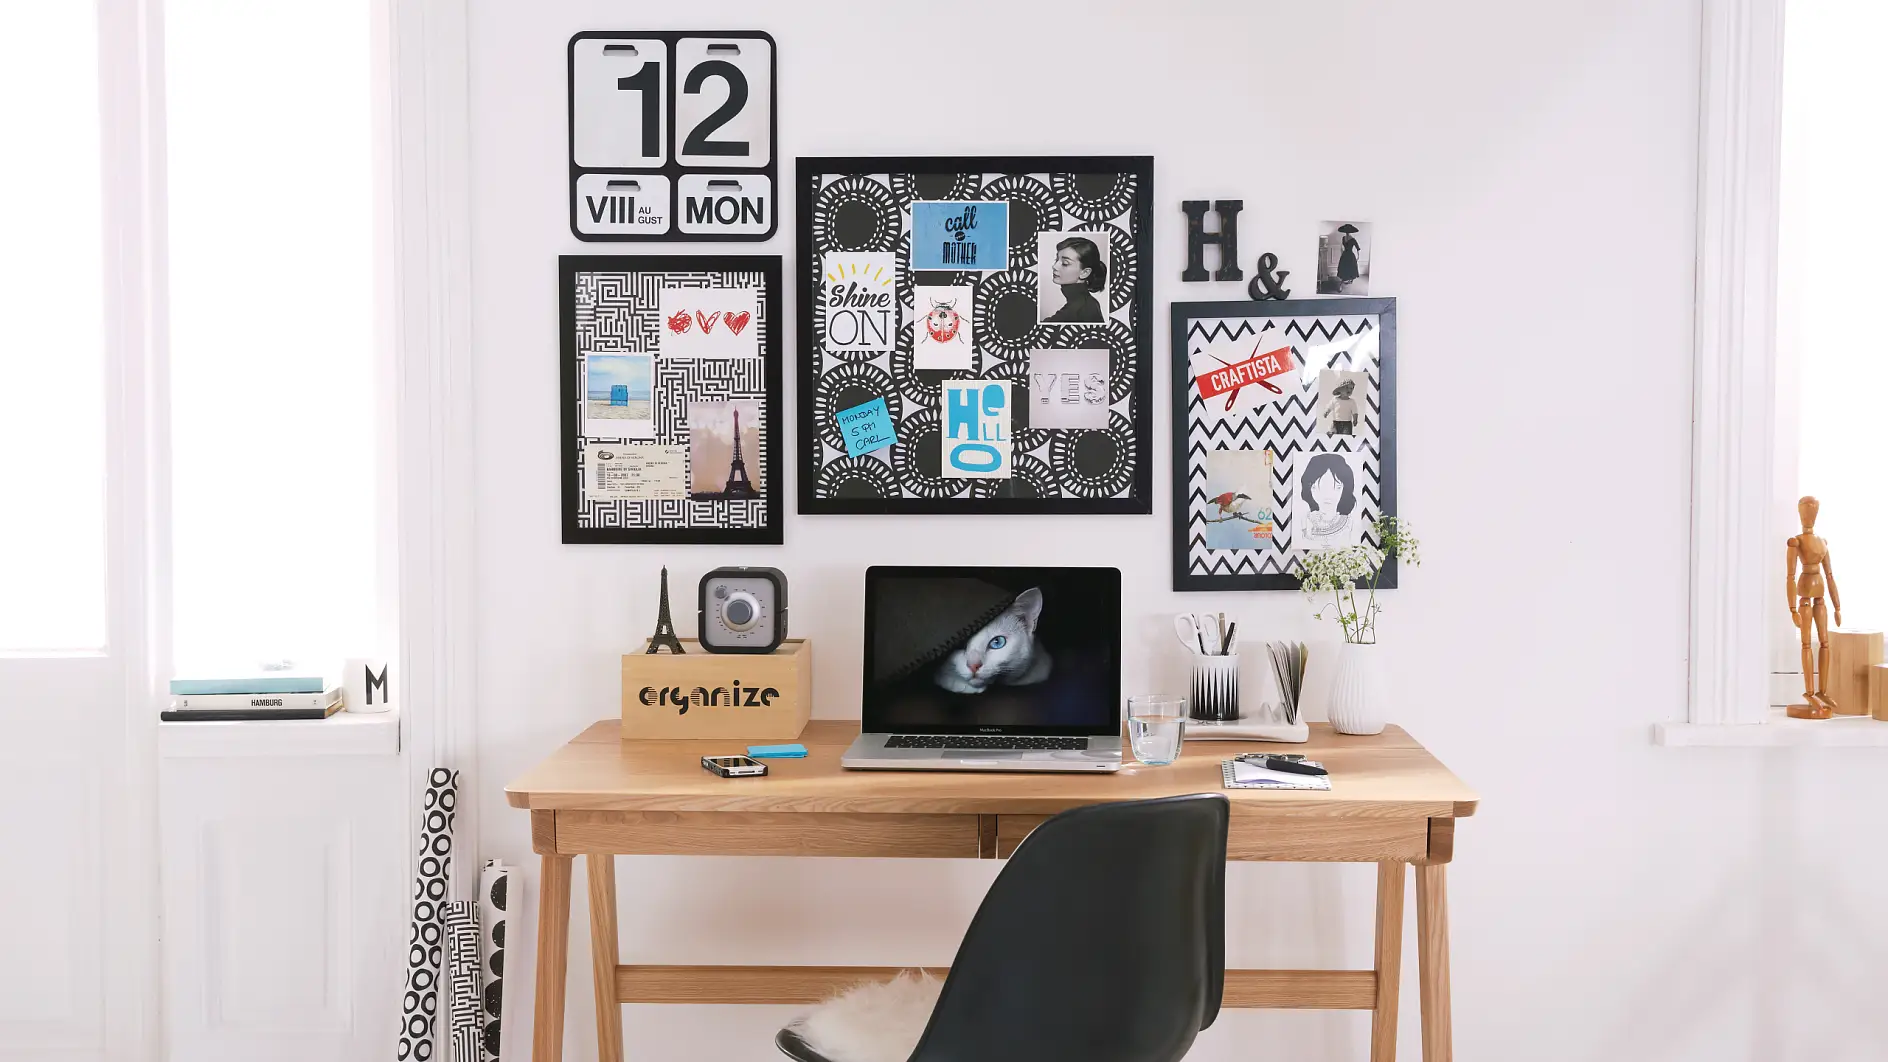 Organize bits and pieces of paper: The Memo Boards are made in a jiffy and offer plenty of space for notes and cards - simply attach them with tesa TACK® adhesive pads.